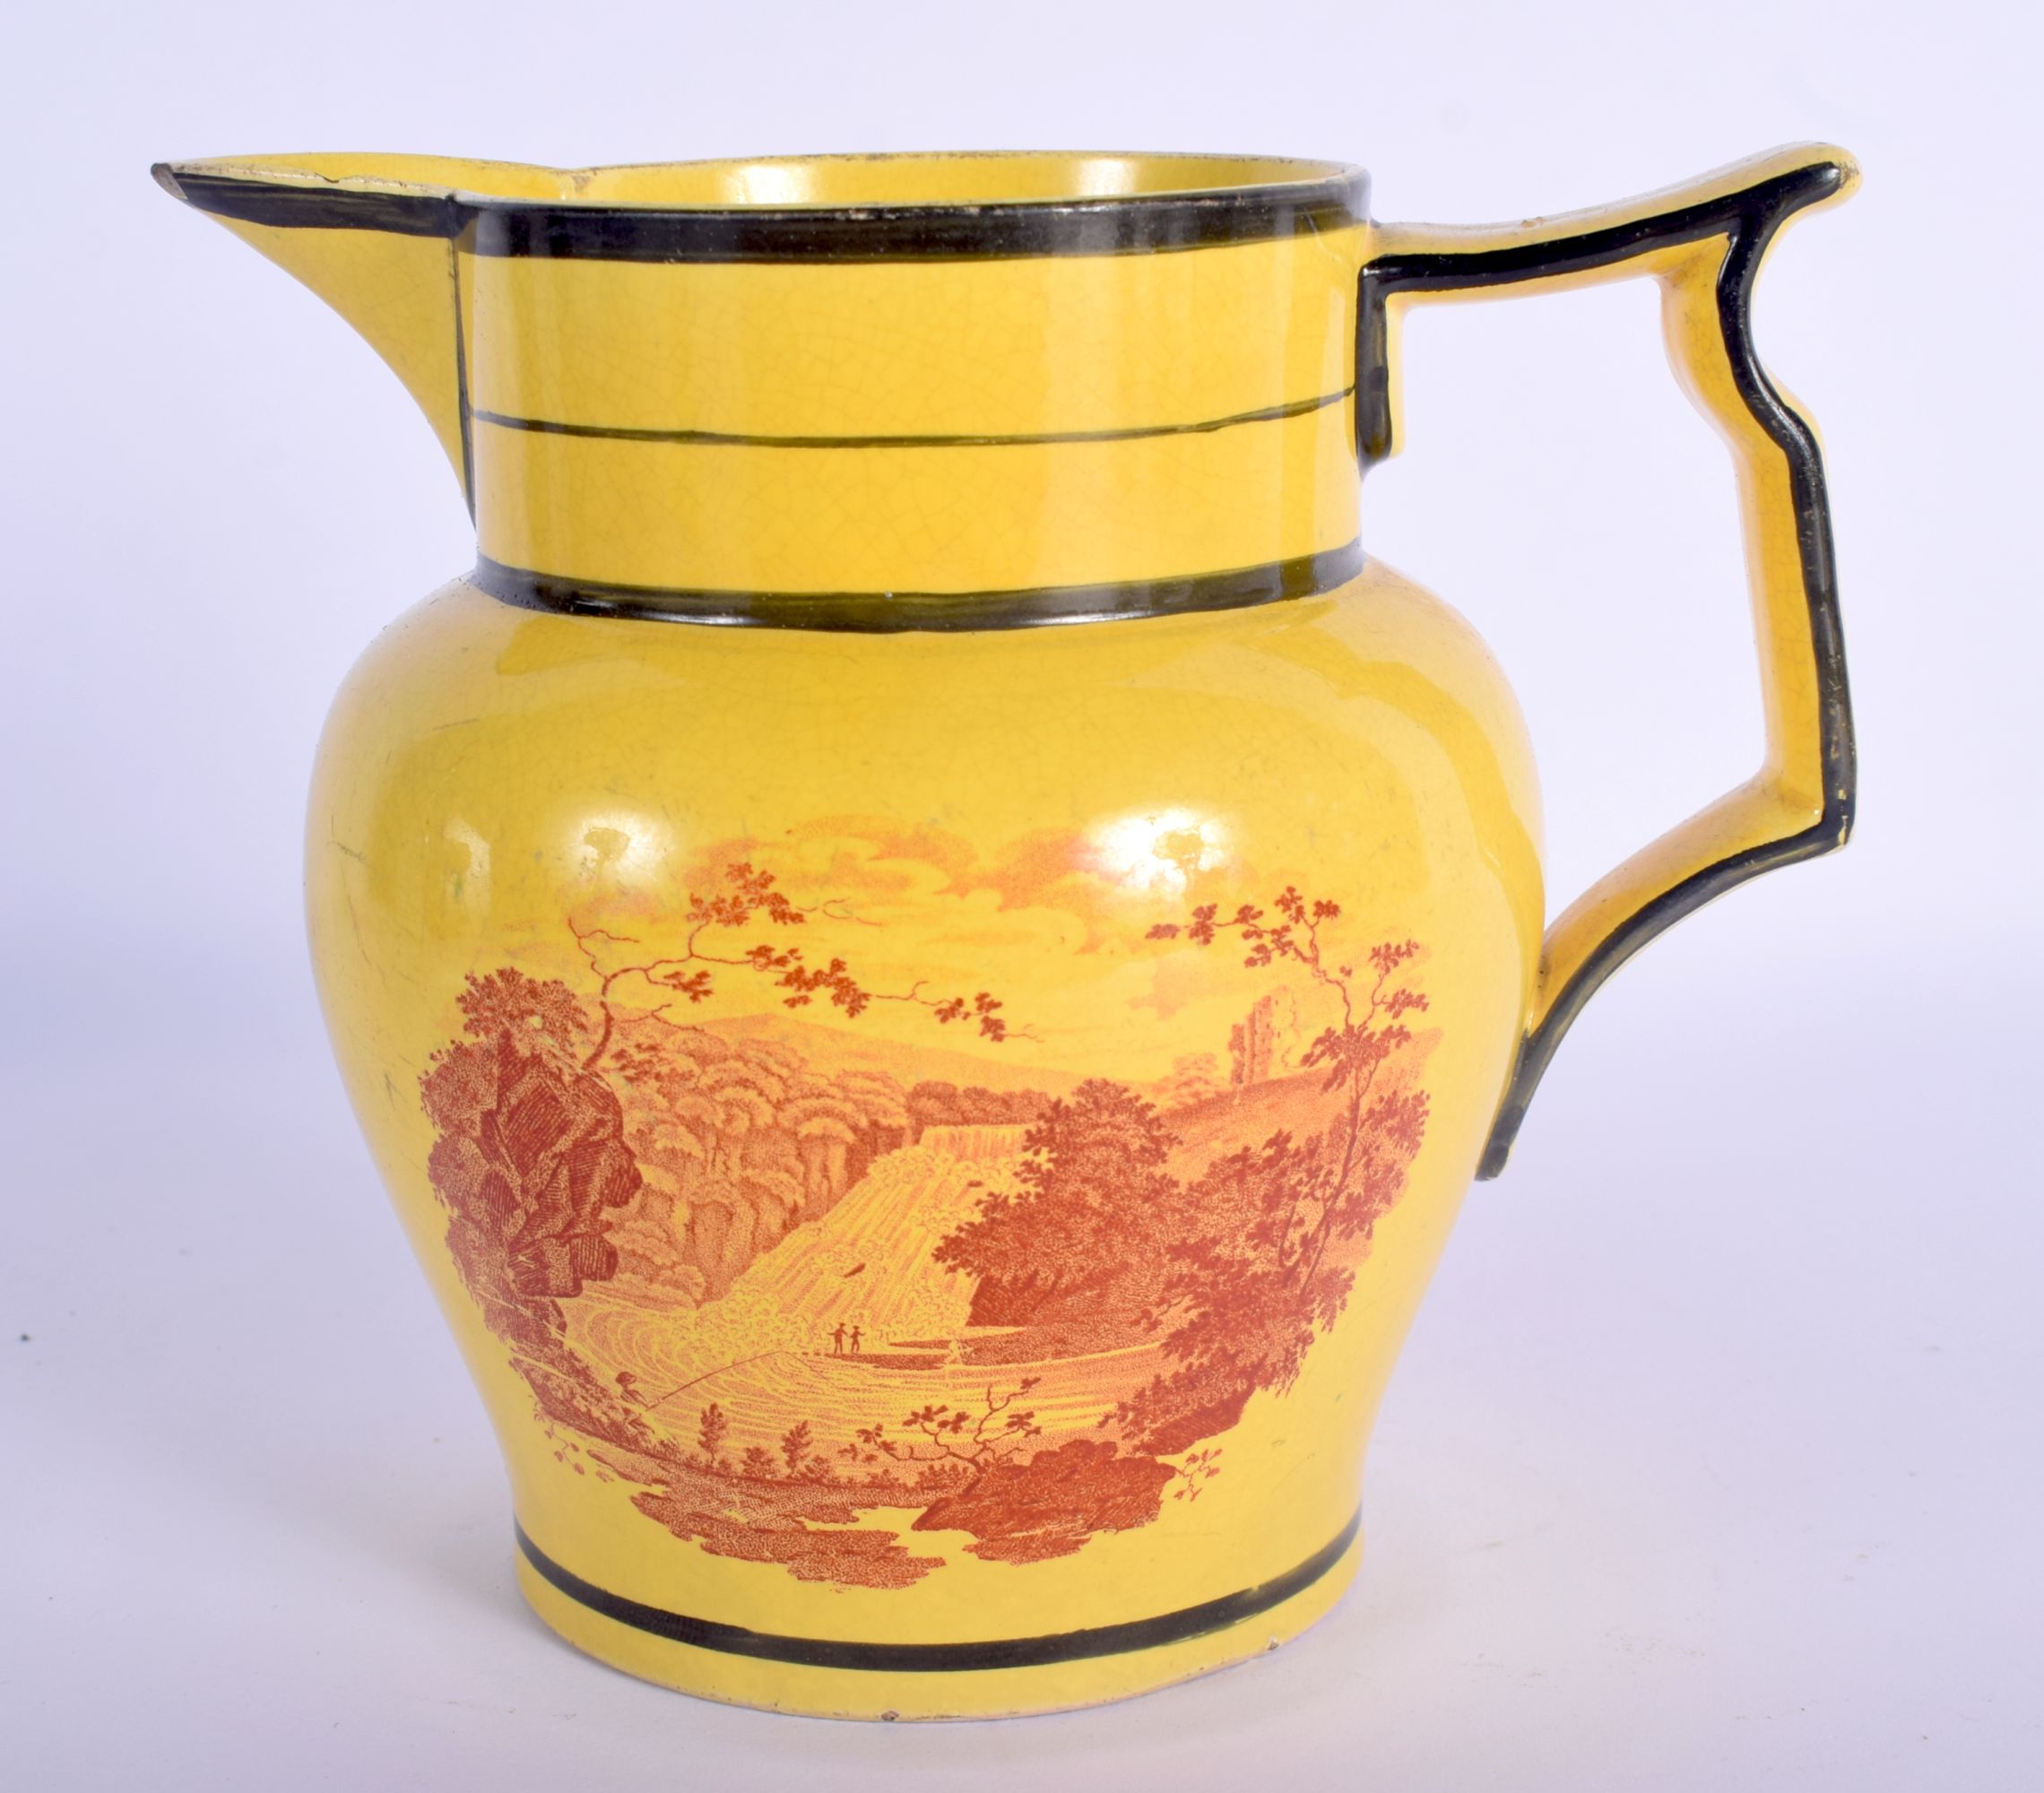 A RARE EARLY 19TH CENTURY CANARY YELLOW POTTERY JUG printed with red landscapes. 13 cm x 13 cm. - Image 2 of 3